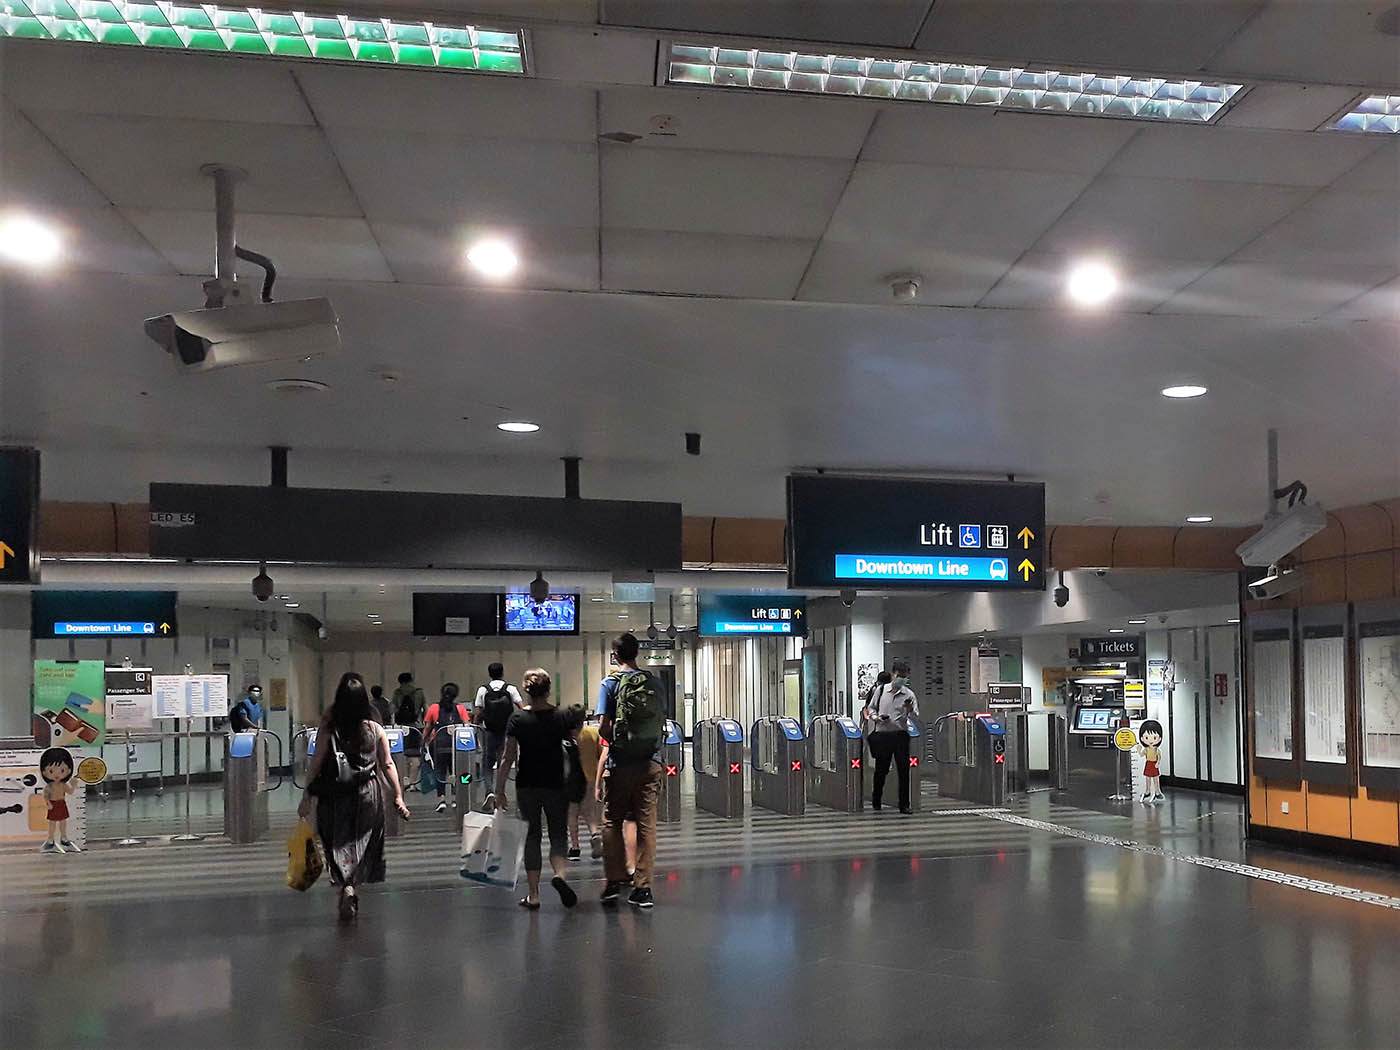 Newton MRT Station - - DT11 Concourse Leading To Downtown Line Platforms